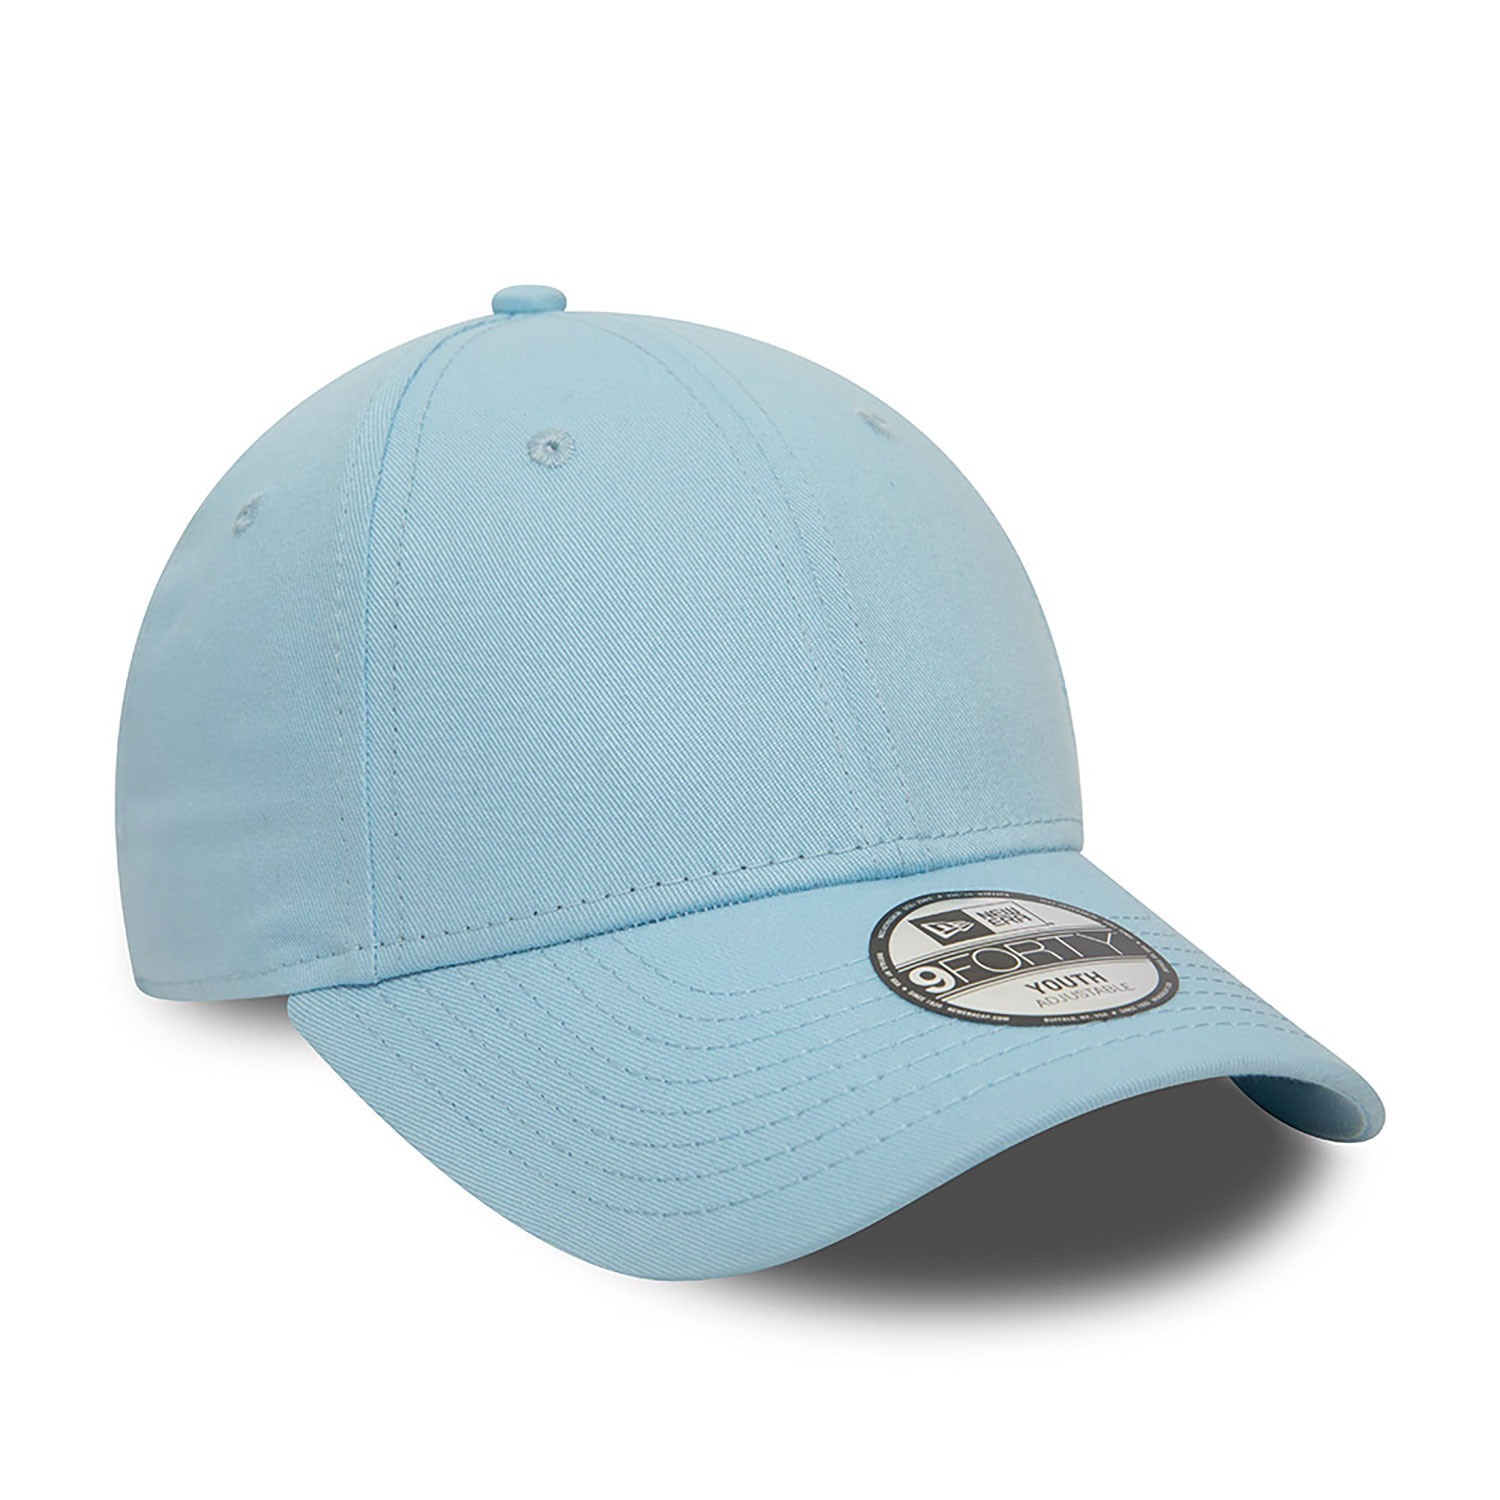 New Era Youth Essential Pastel Blue 9FORTY Adjustable Cap